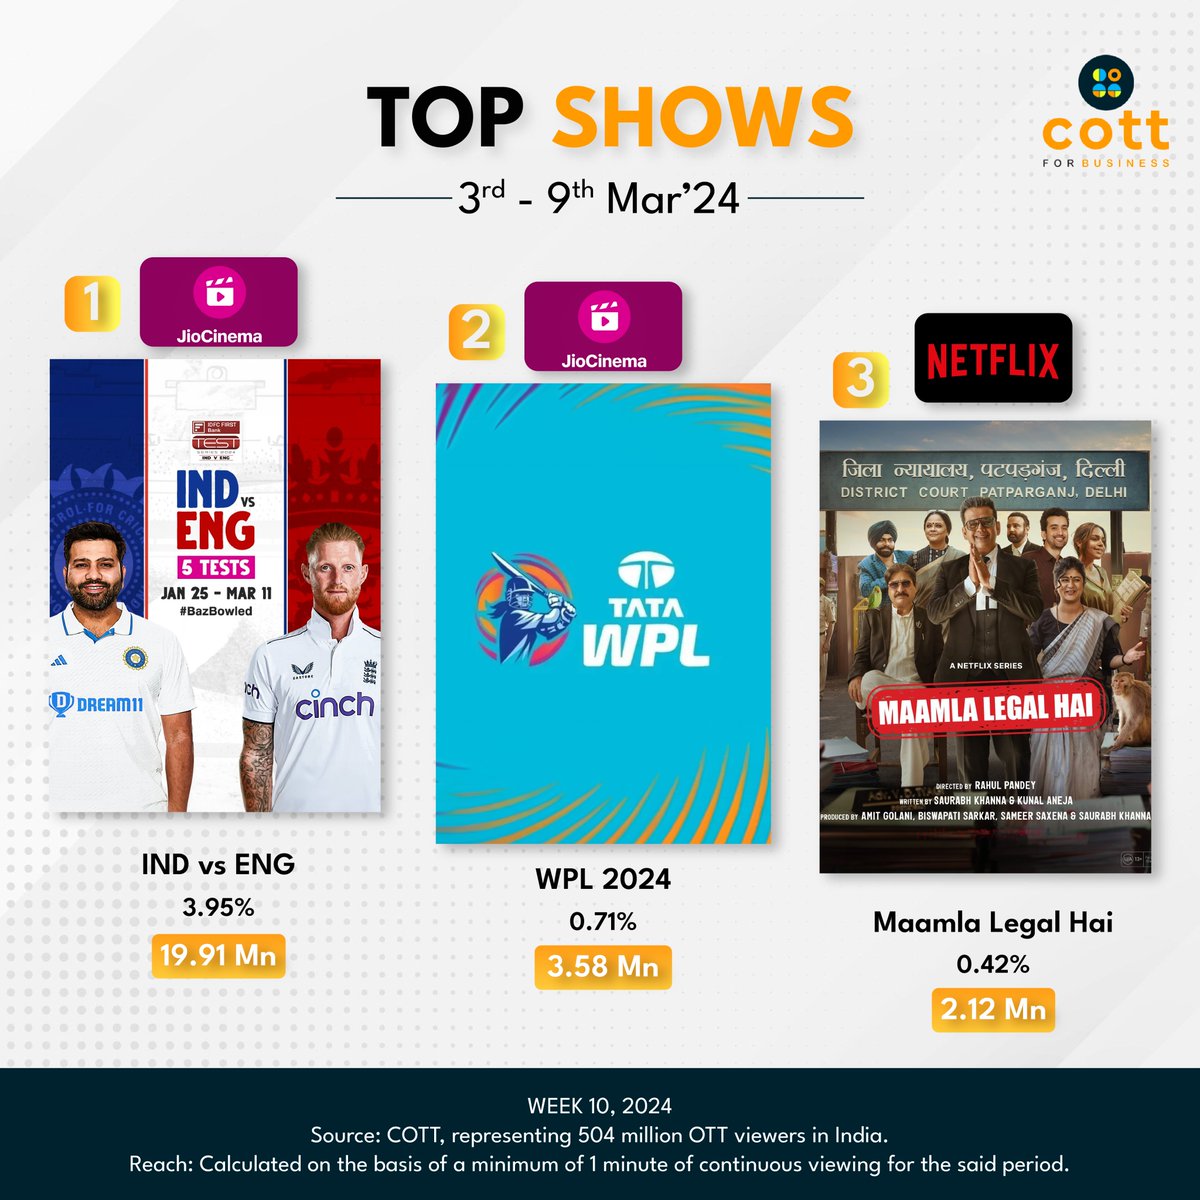 🚀TOP MOVIES of the WEEK / 10 (3rd – 9th Mar’24) . 'IND Vs ENG' had the highest reach with 19.91 Mn unique viewers, “@wplt20' & 'Maamla Legal Hai' with 3.58 Mn and 2.12 Mn unique viewers respectively. . @saurabh_khanna , @EkThapaTiger , @ravikishann _ #COTT , #DataAnalytics